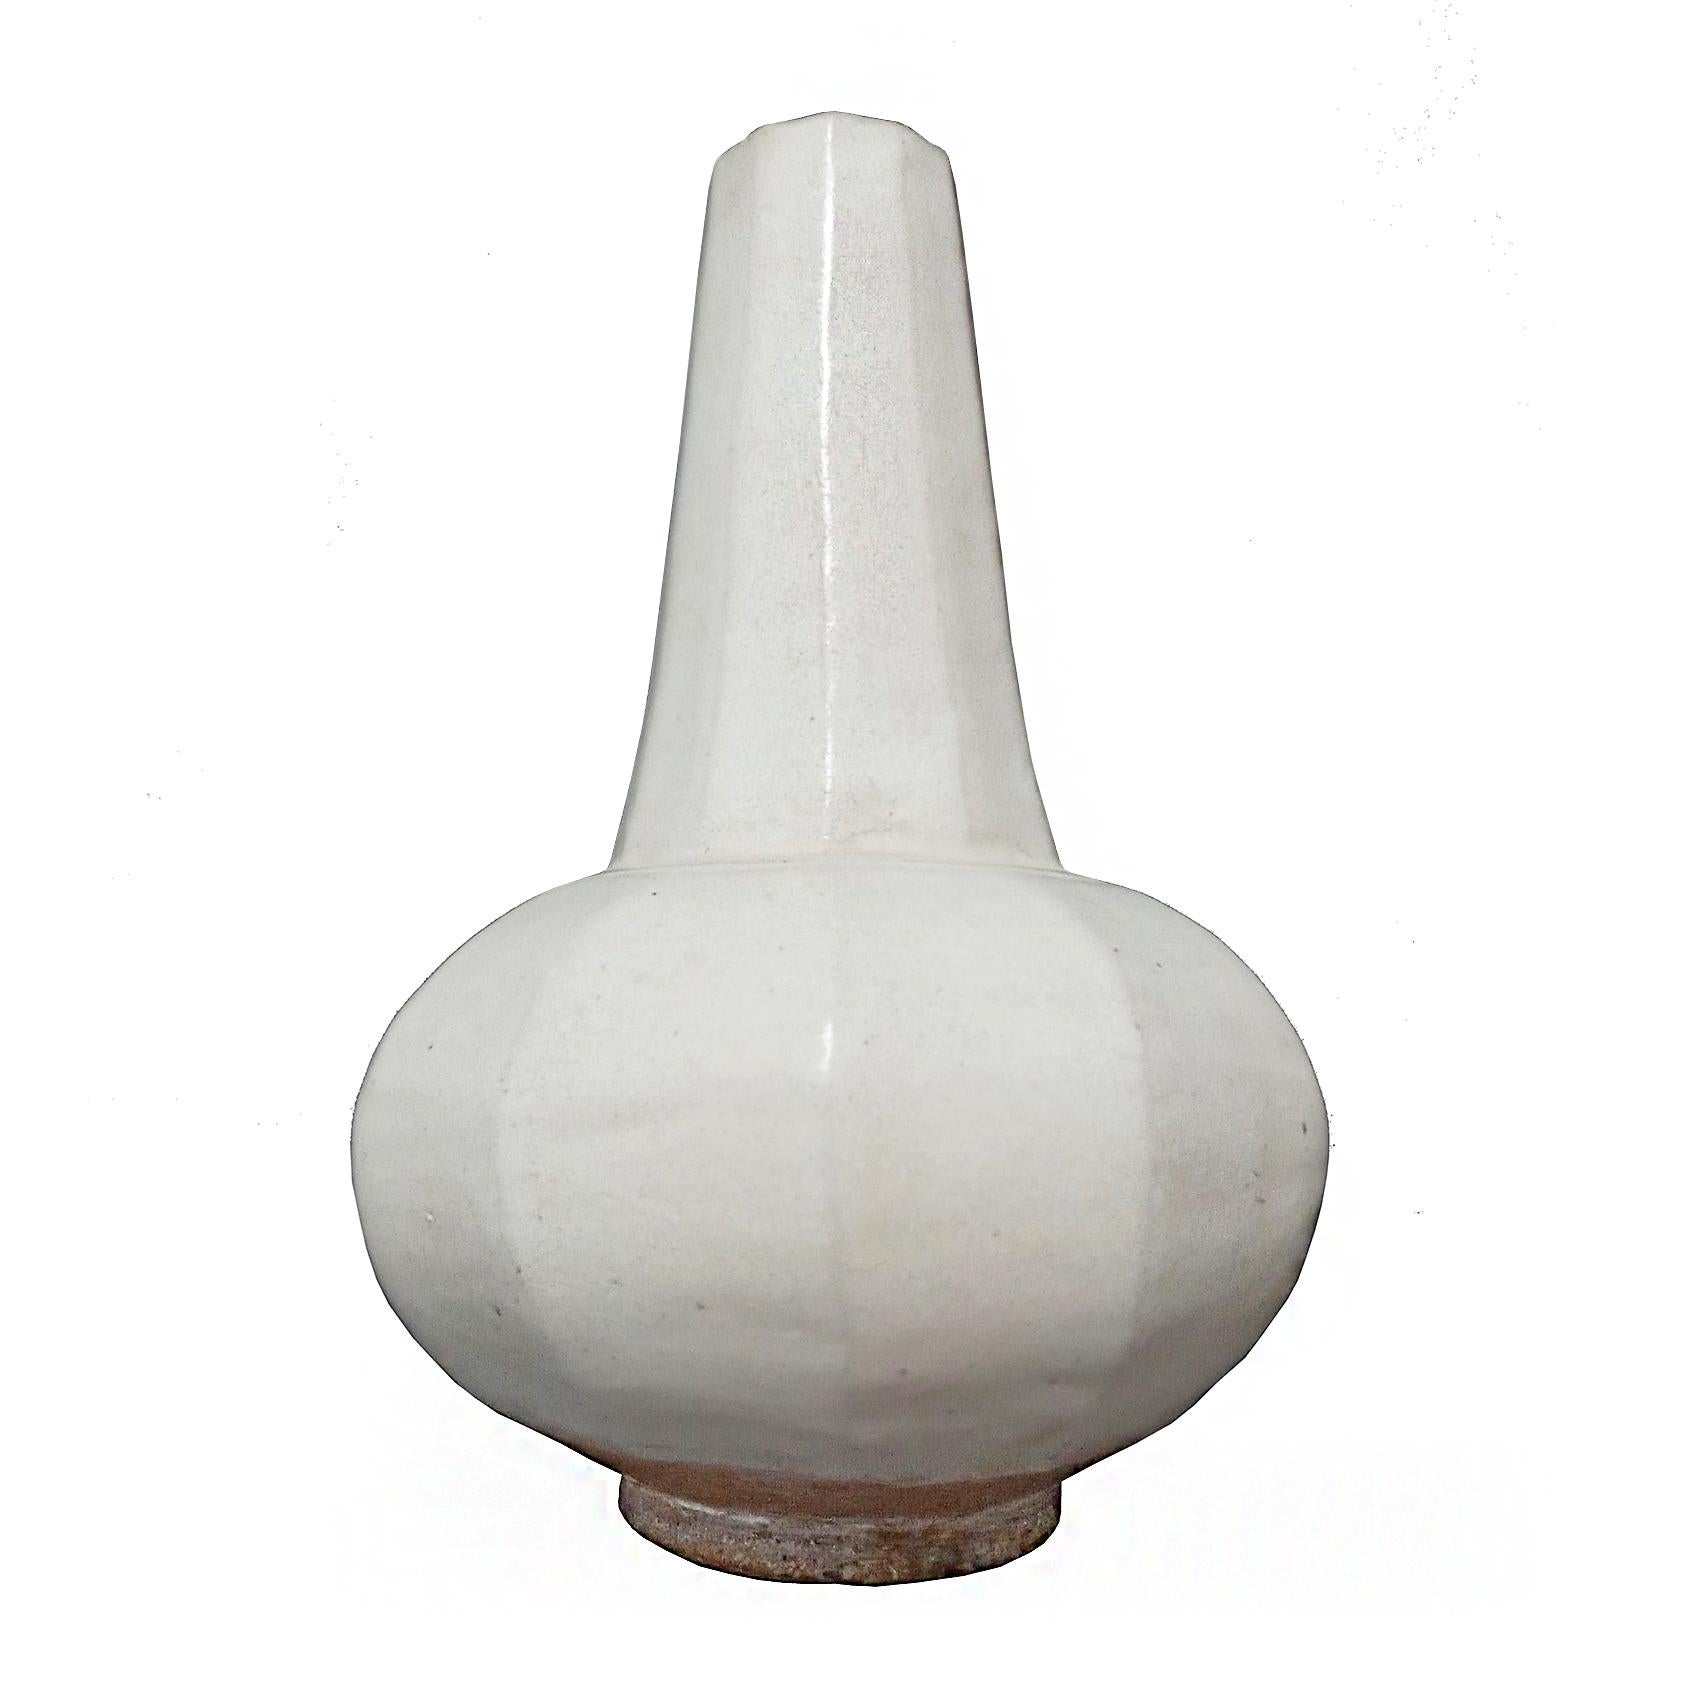 A ceramic vase from Thailand, with off-white glaze. Contemporary. 

While the golden age of Thai ceramics ended around the 15-16th Centuries, local craftsmen learned the art through generations, later producing a smaller number of pieces with